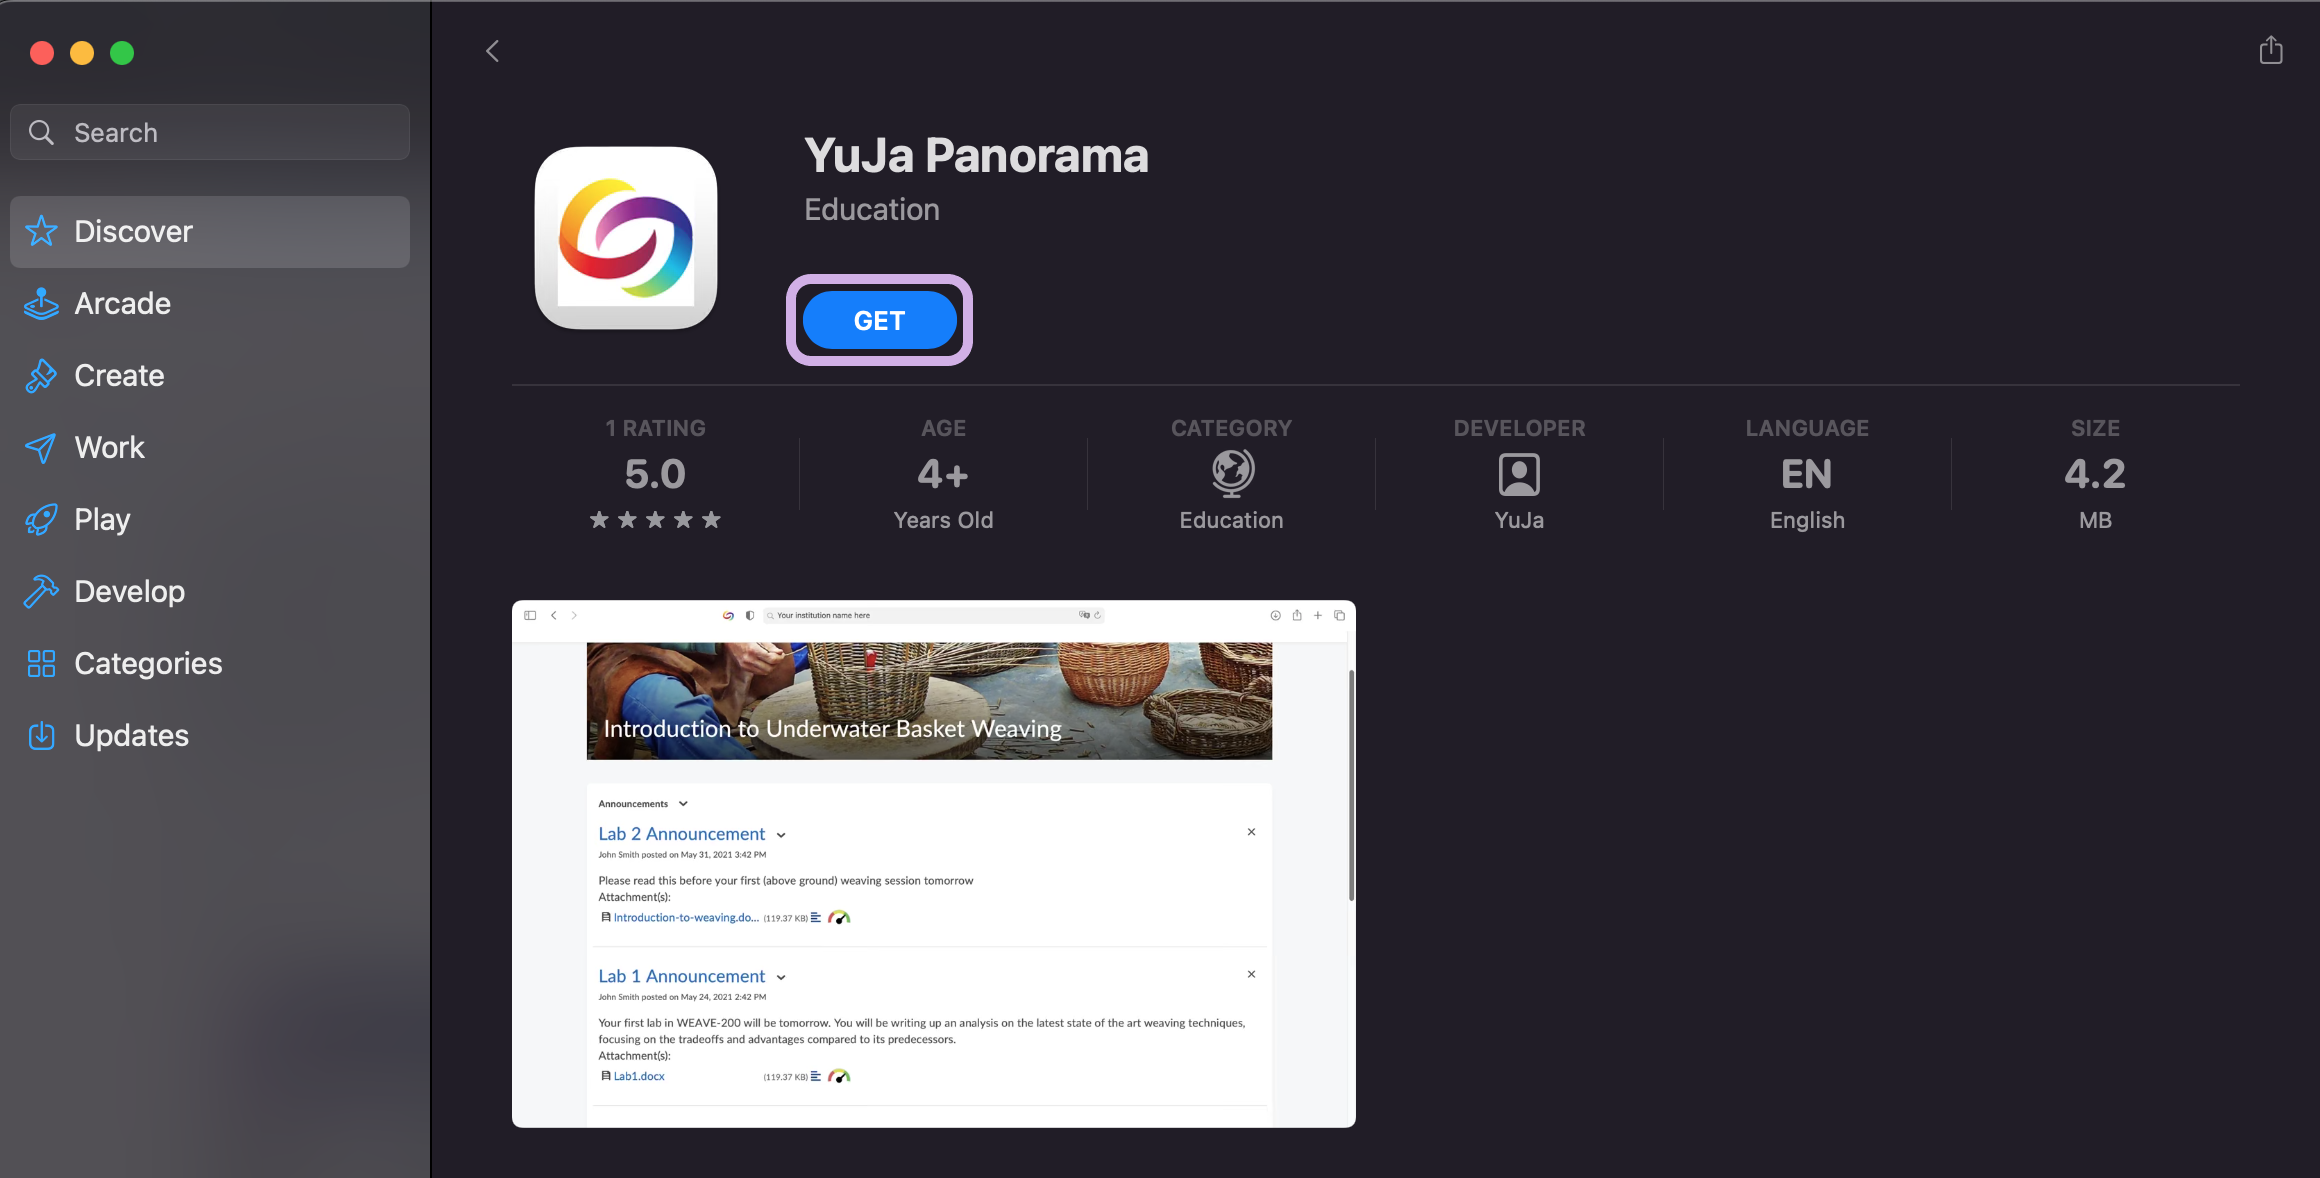 The Get button is highlighted on the YuJa Panorama page of the App Store.